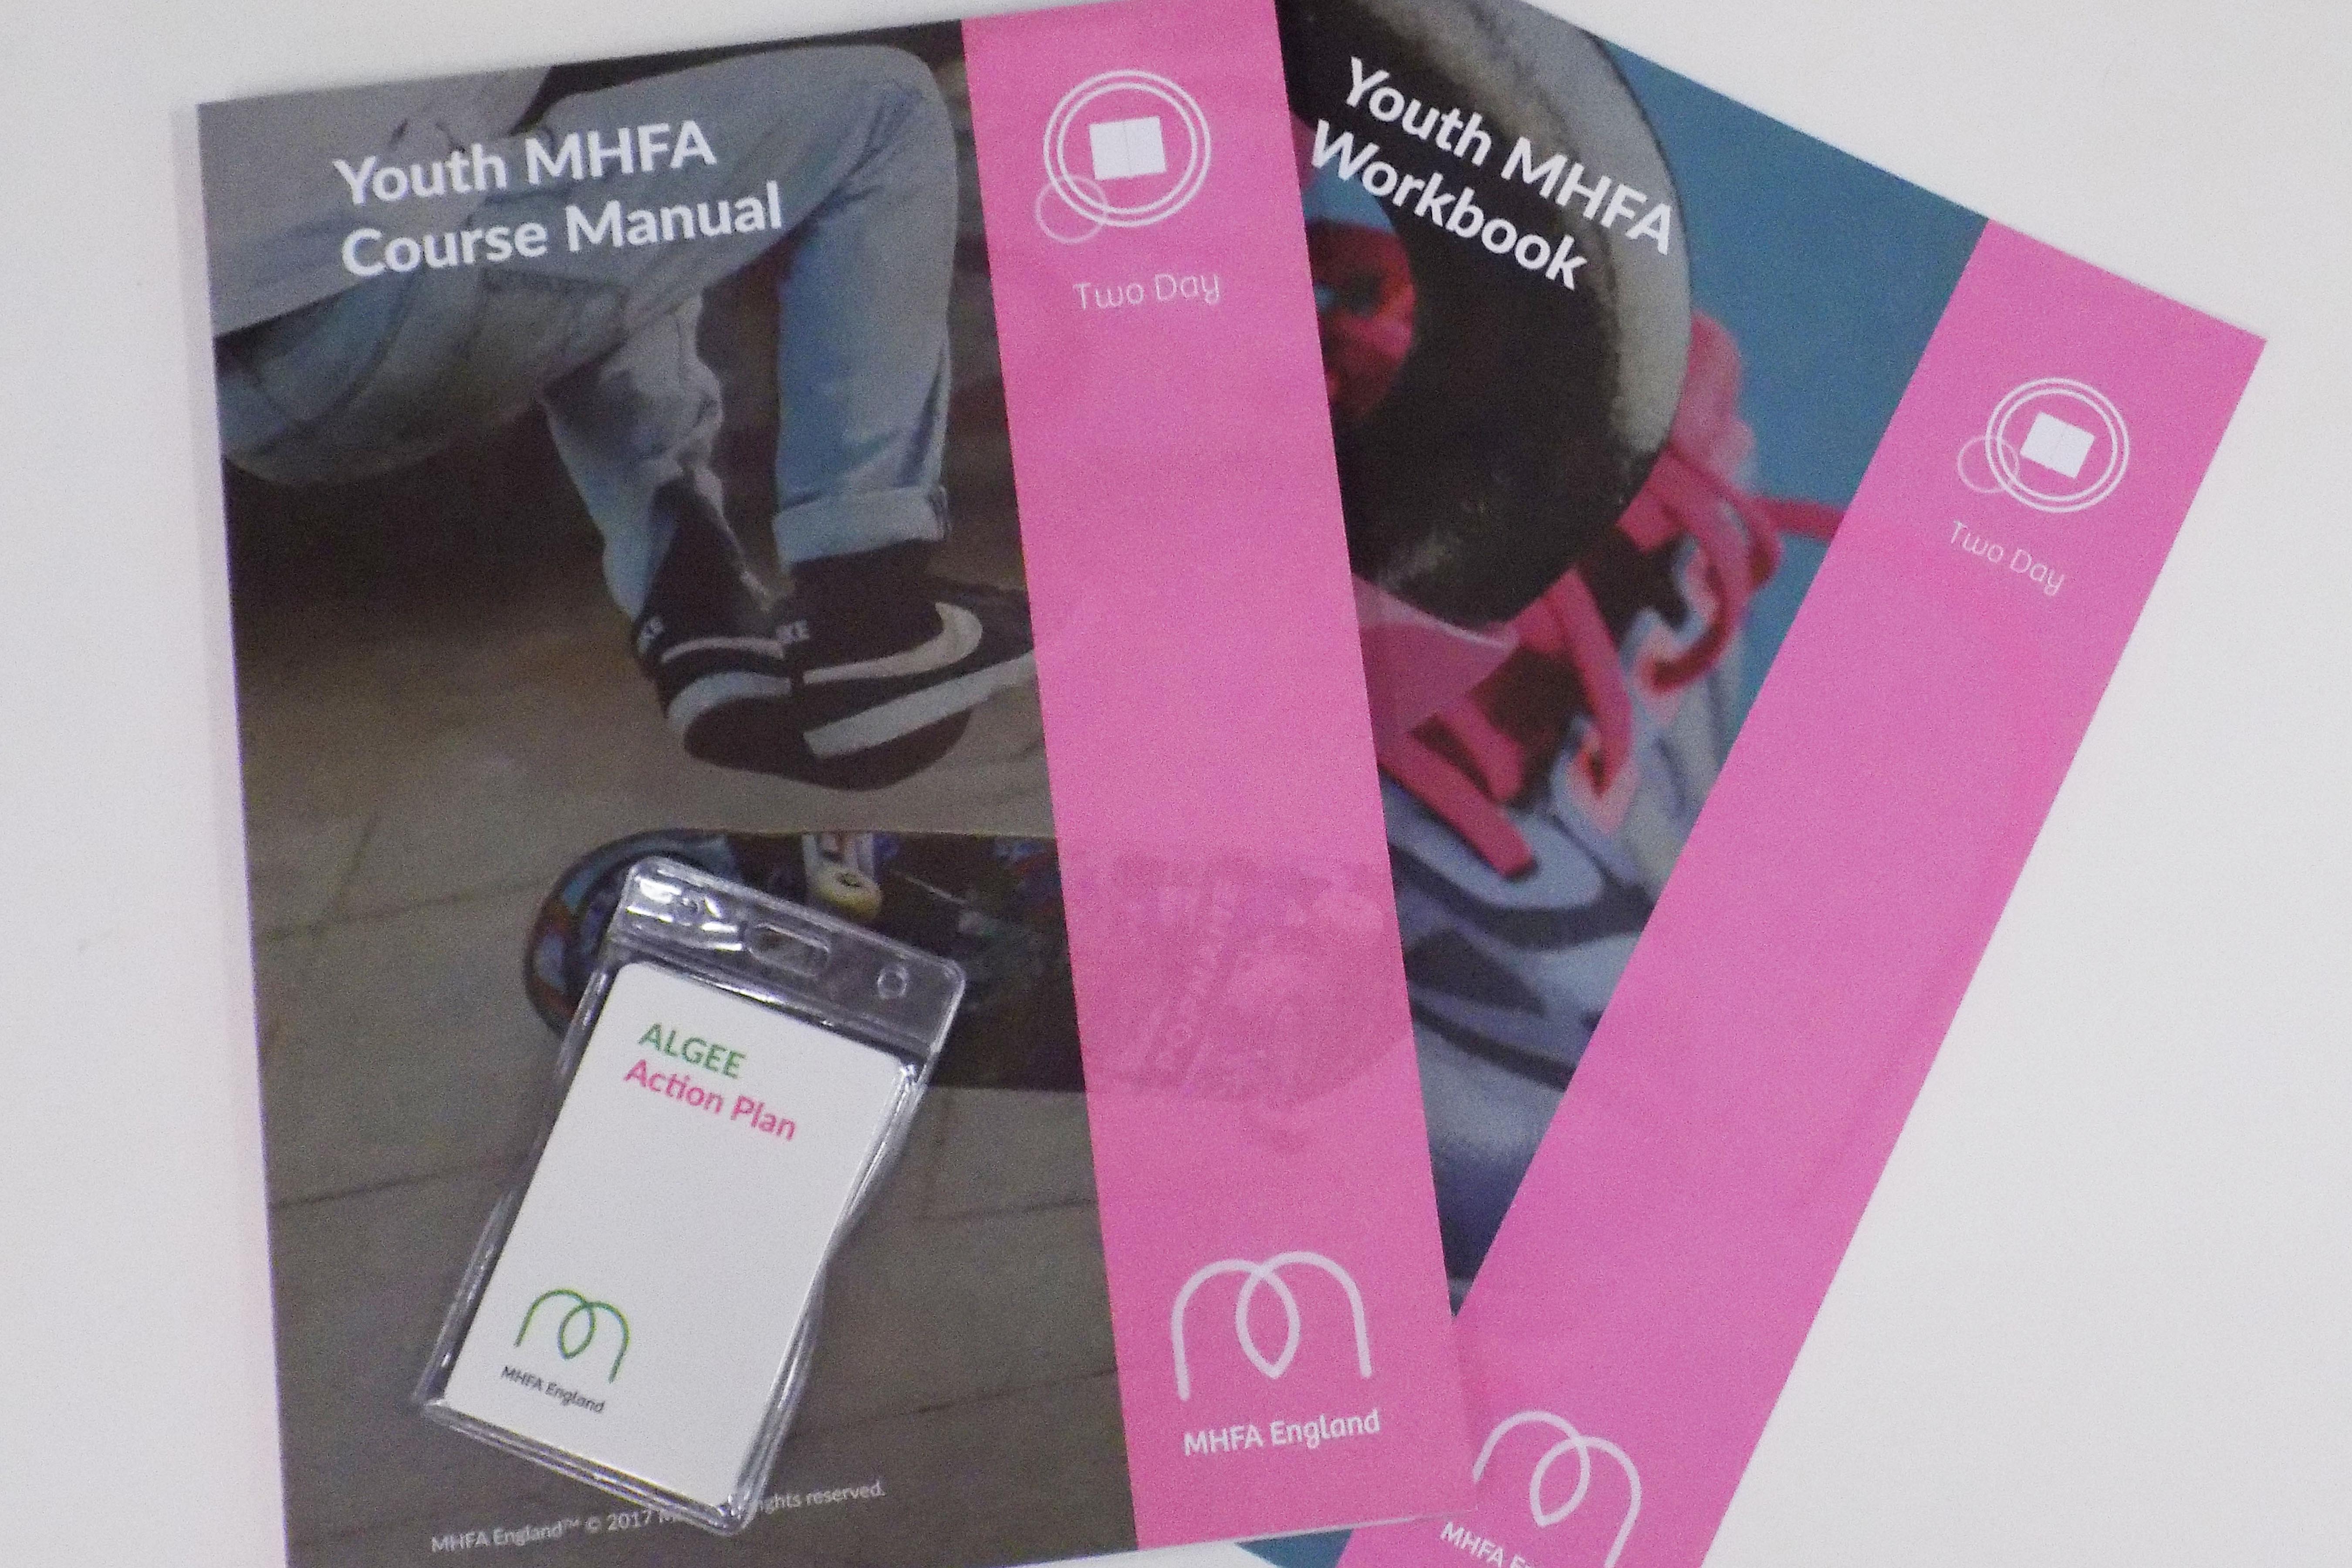 Training Offering - Youth Mental Health First Aid Materials